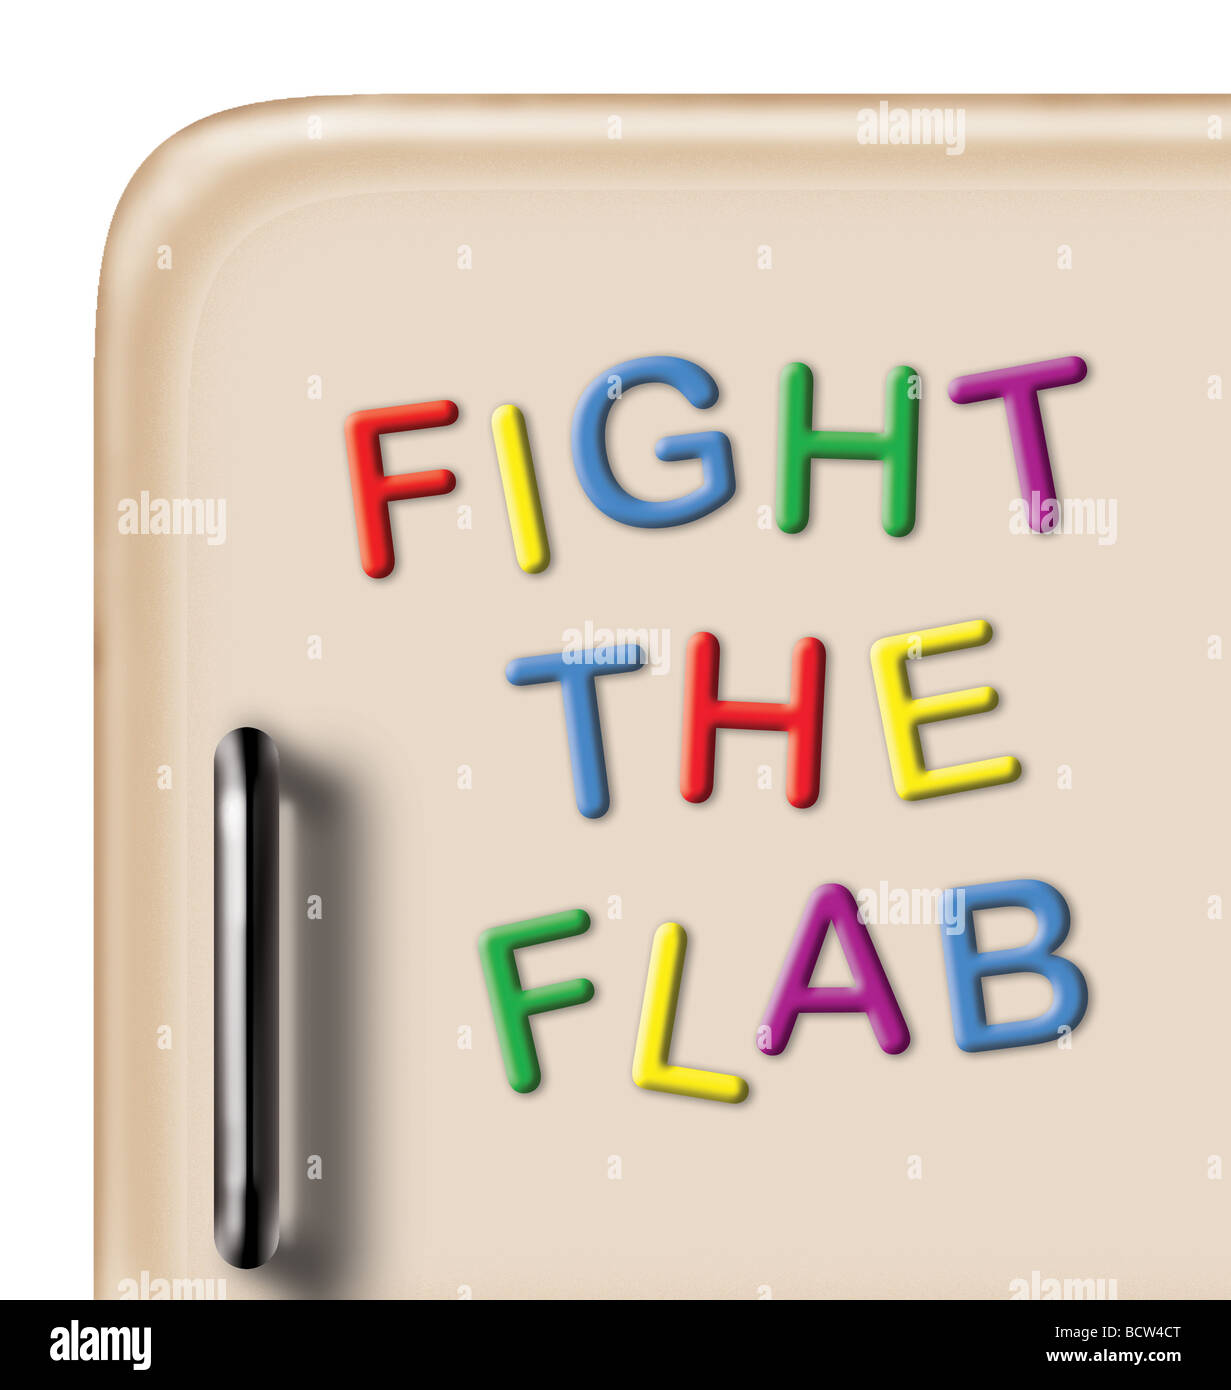 1950’s style fridge door with magnets making slogan ‘FIGHT THE FLAB’ on white background. Stock Photo